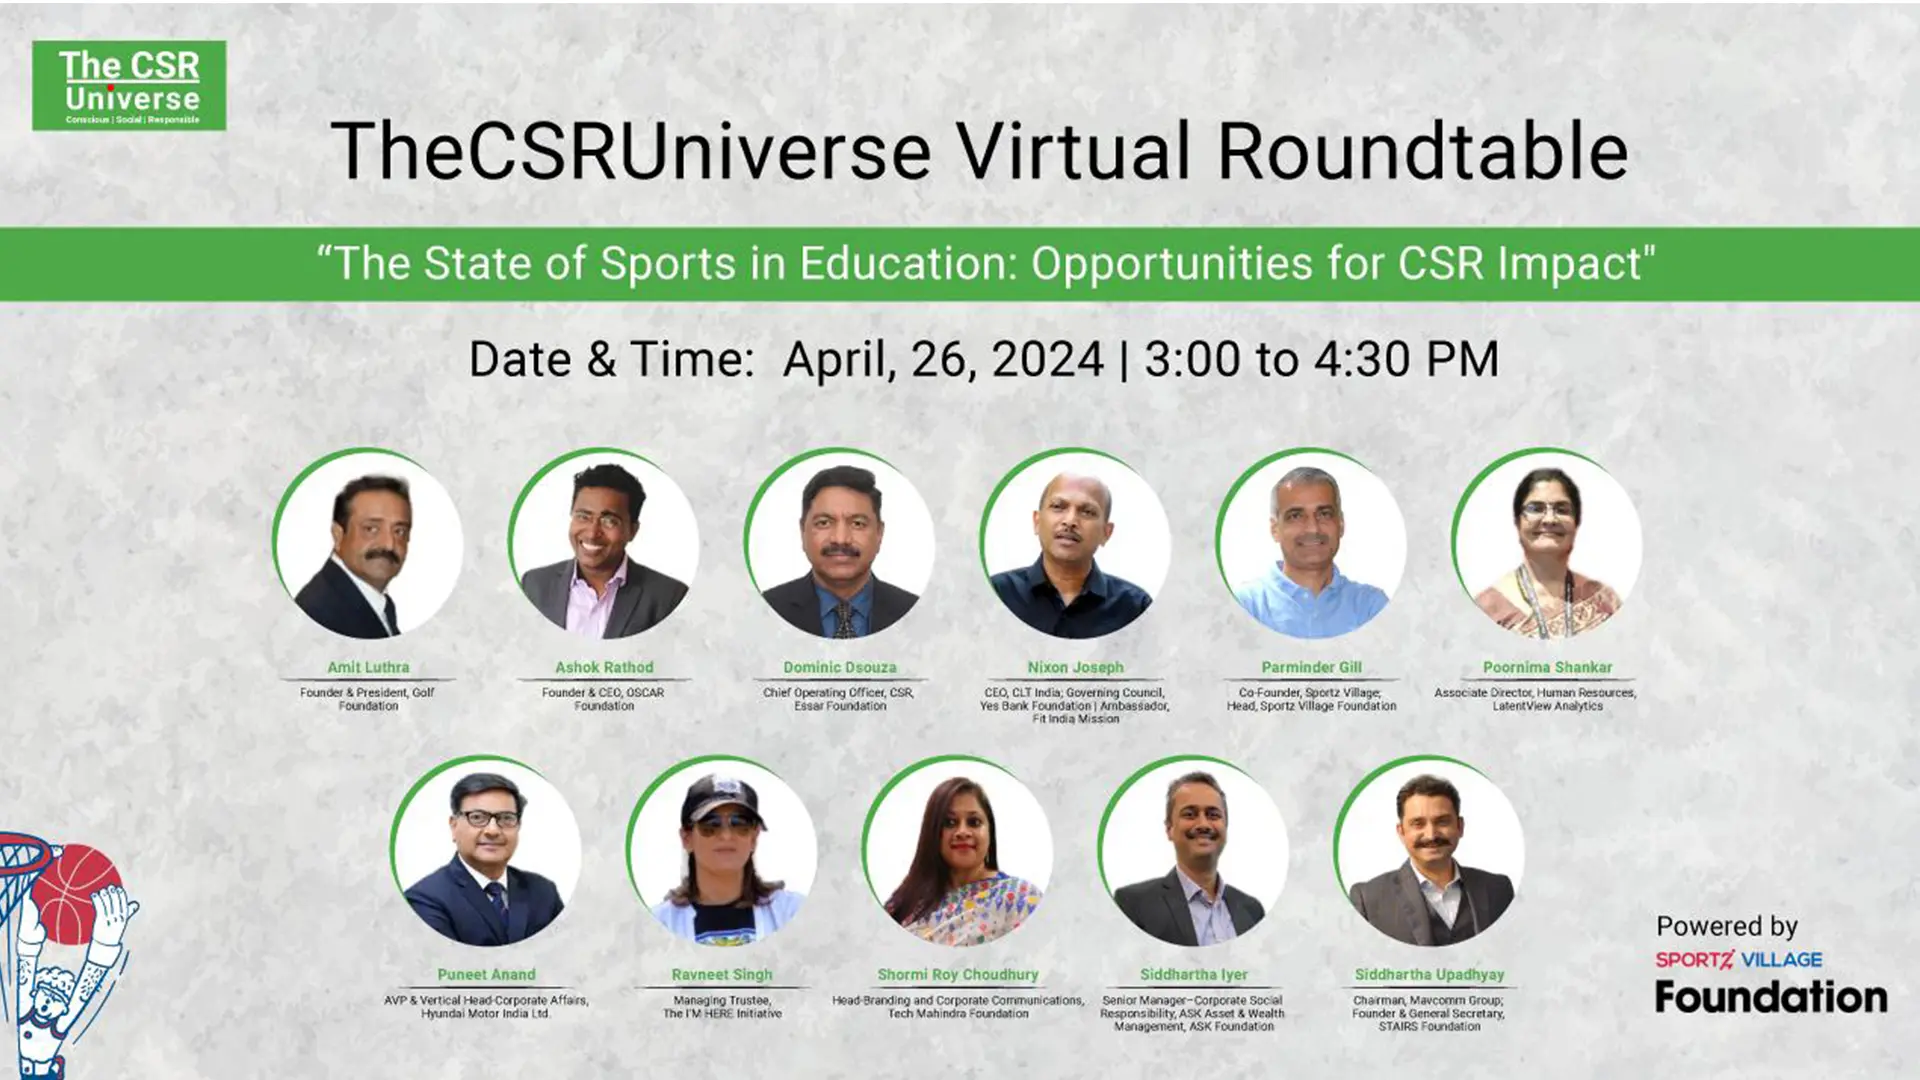 Essar Foundation advocates for Sports in Education at the CSR Universe Roundtable